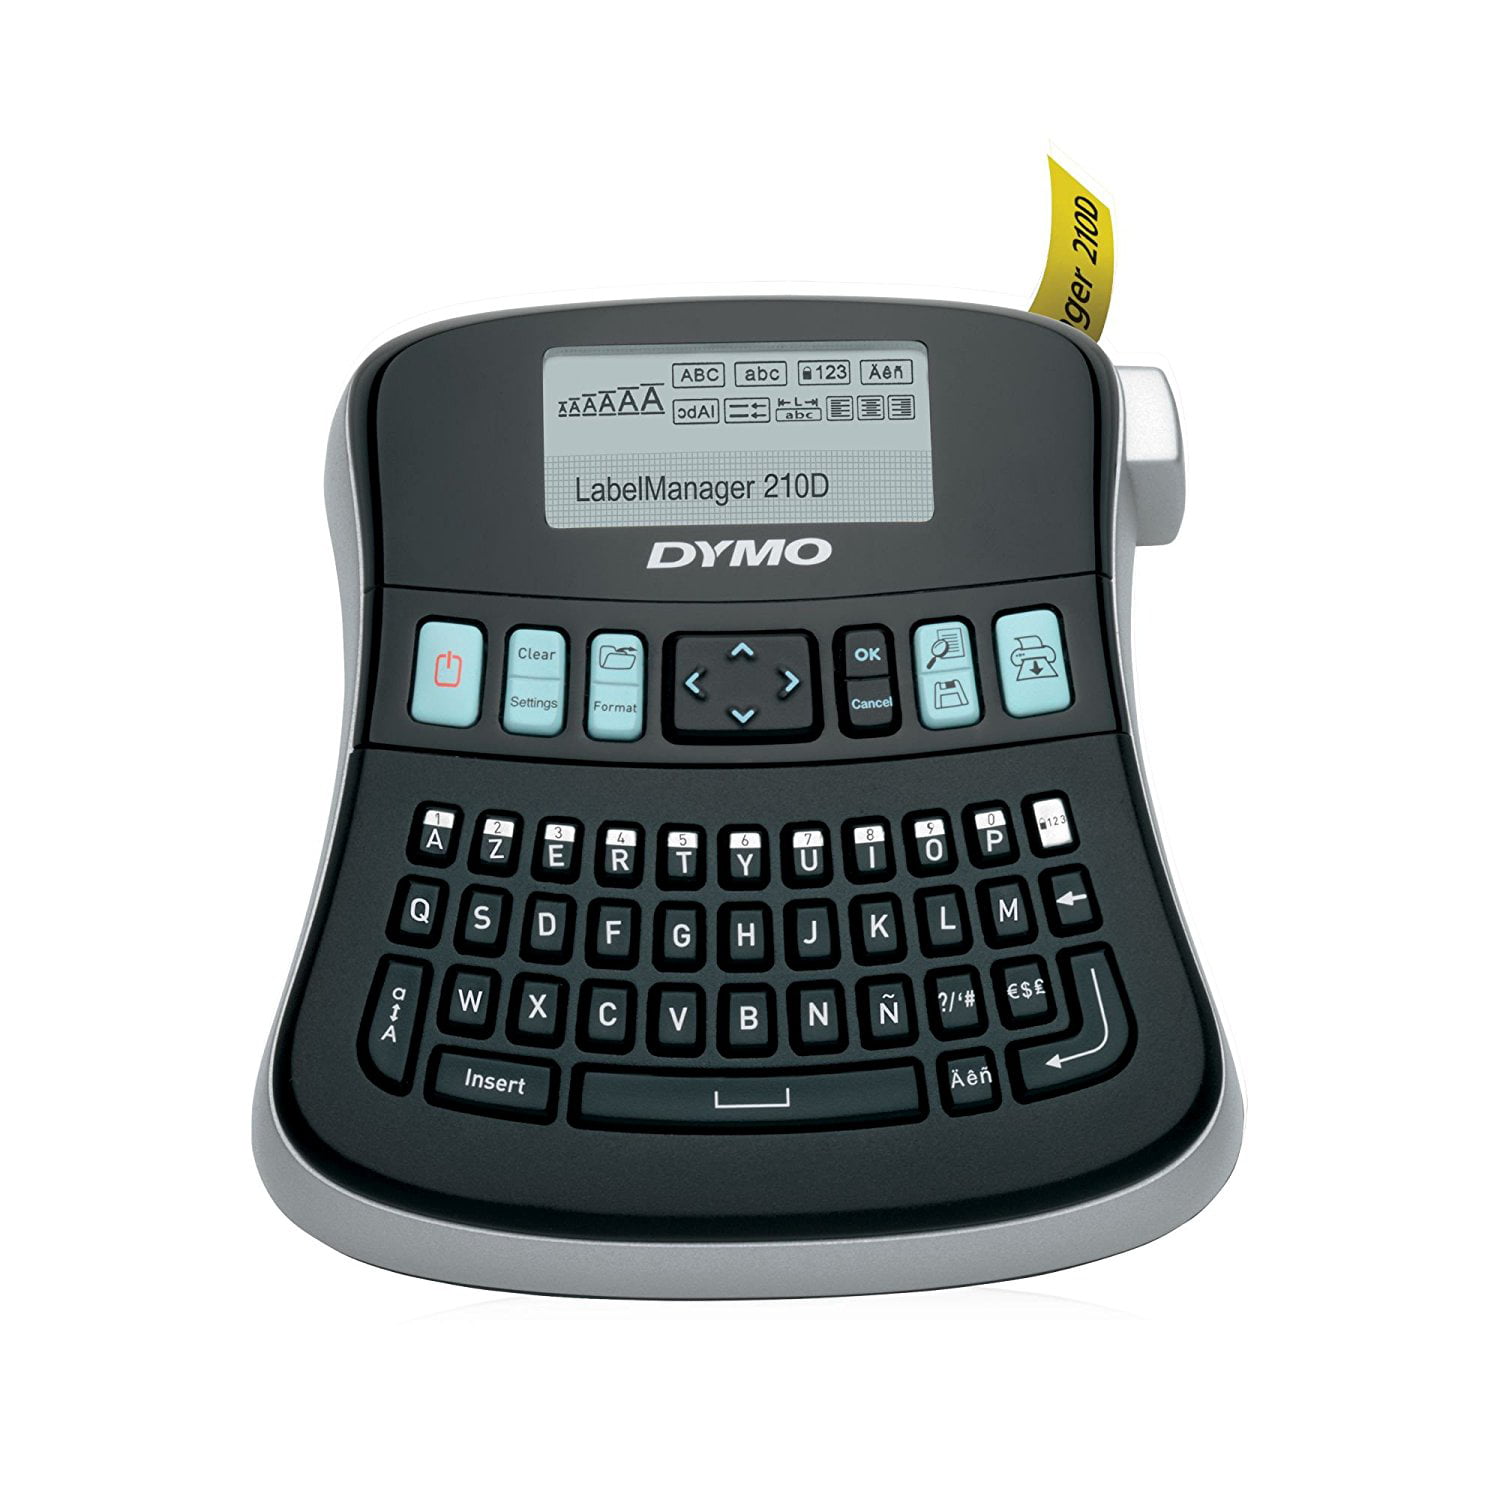 DYMO LabelManager 210D All Purpose Label Maker with Large Display and QWERTY Keyboard 1738345